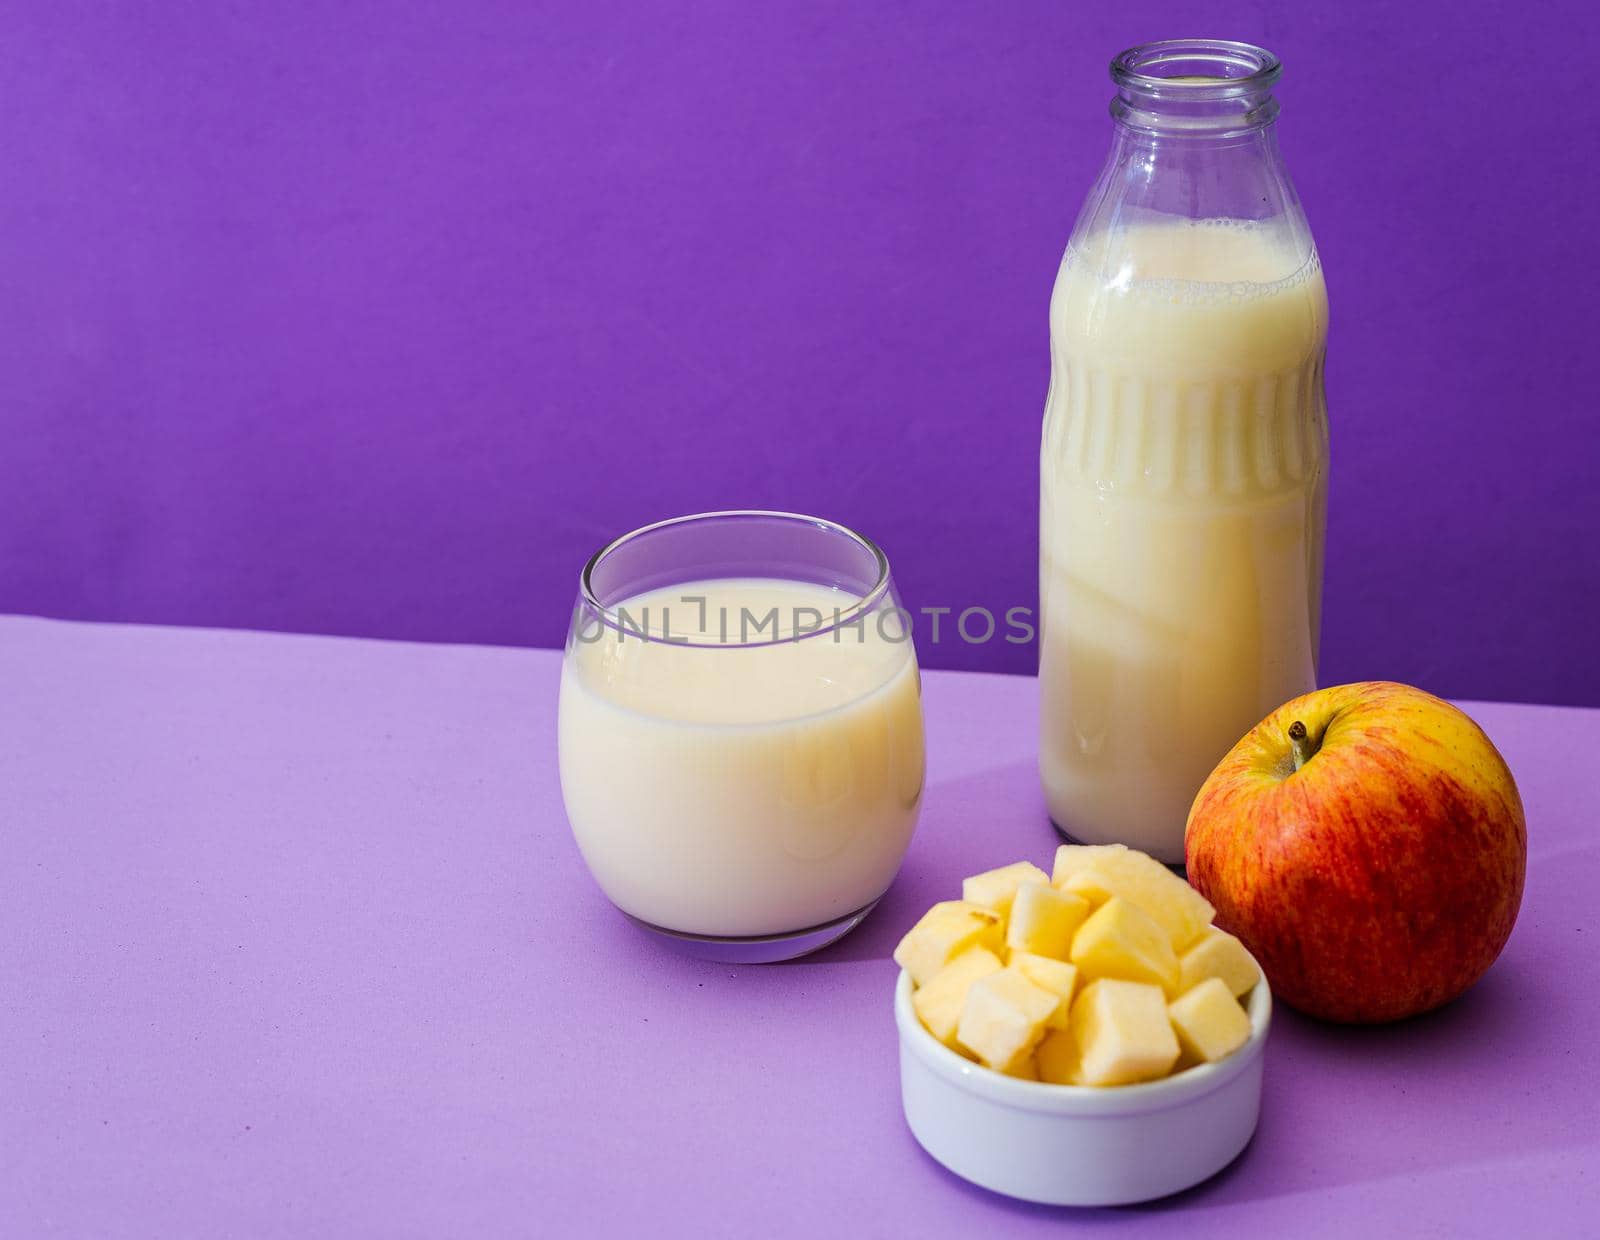 Glass bottle and large glass with milk and a whole red apple next to a bowl with apple cubes in a purple or violet environment. Copy space. Landscape orientation.